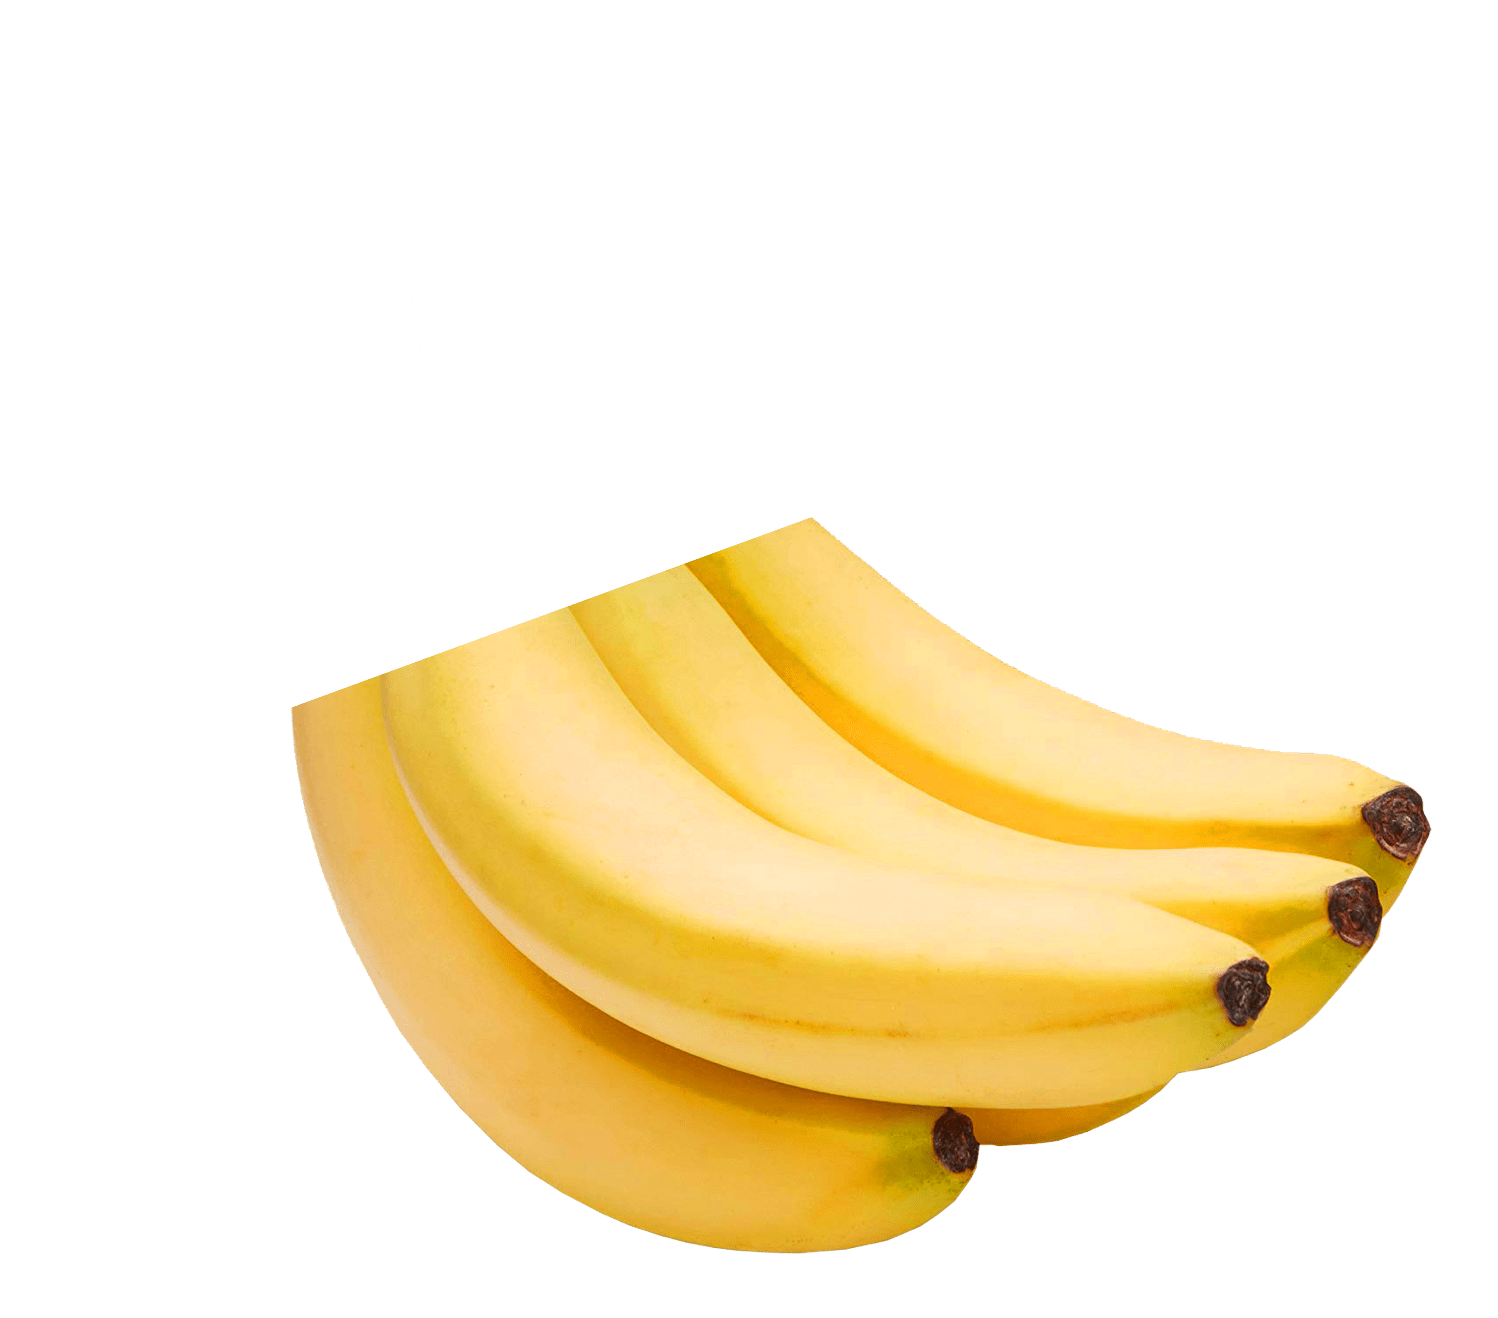 The lower part of a bunch of bananas